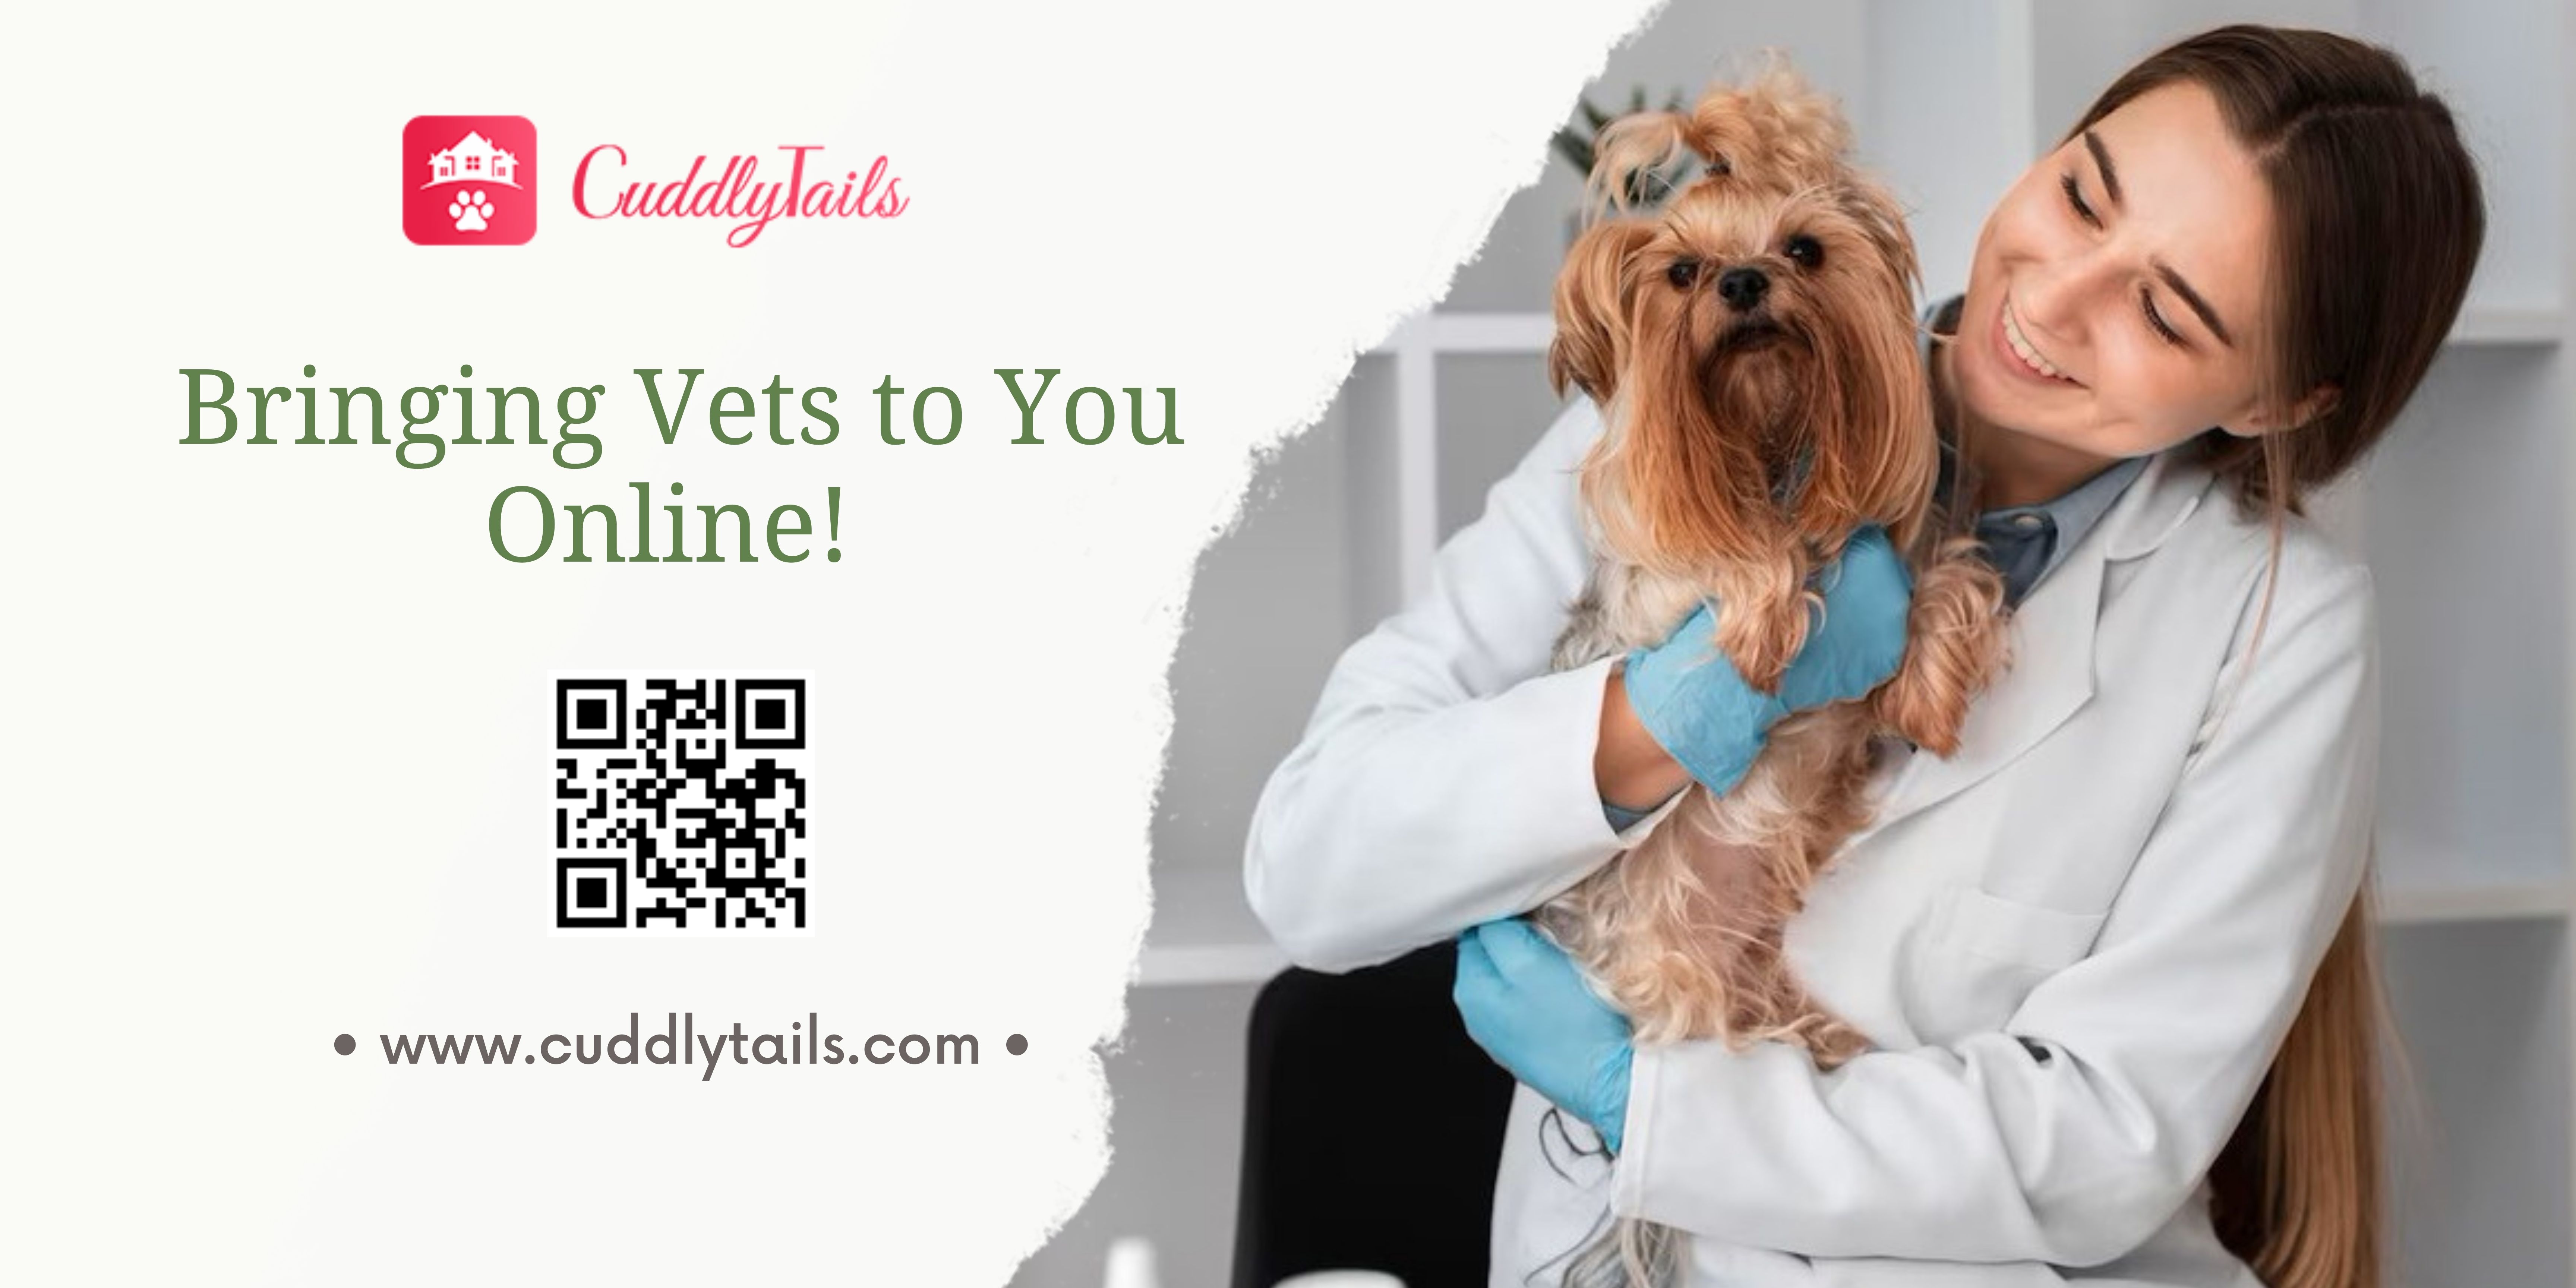 Bridging the Gap Between Convenience and Compassionate Pet Healthcare - Cuddlytails Launched Its Virtual Vet Care Service